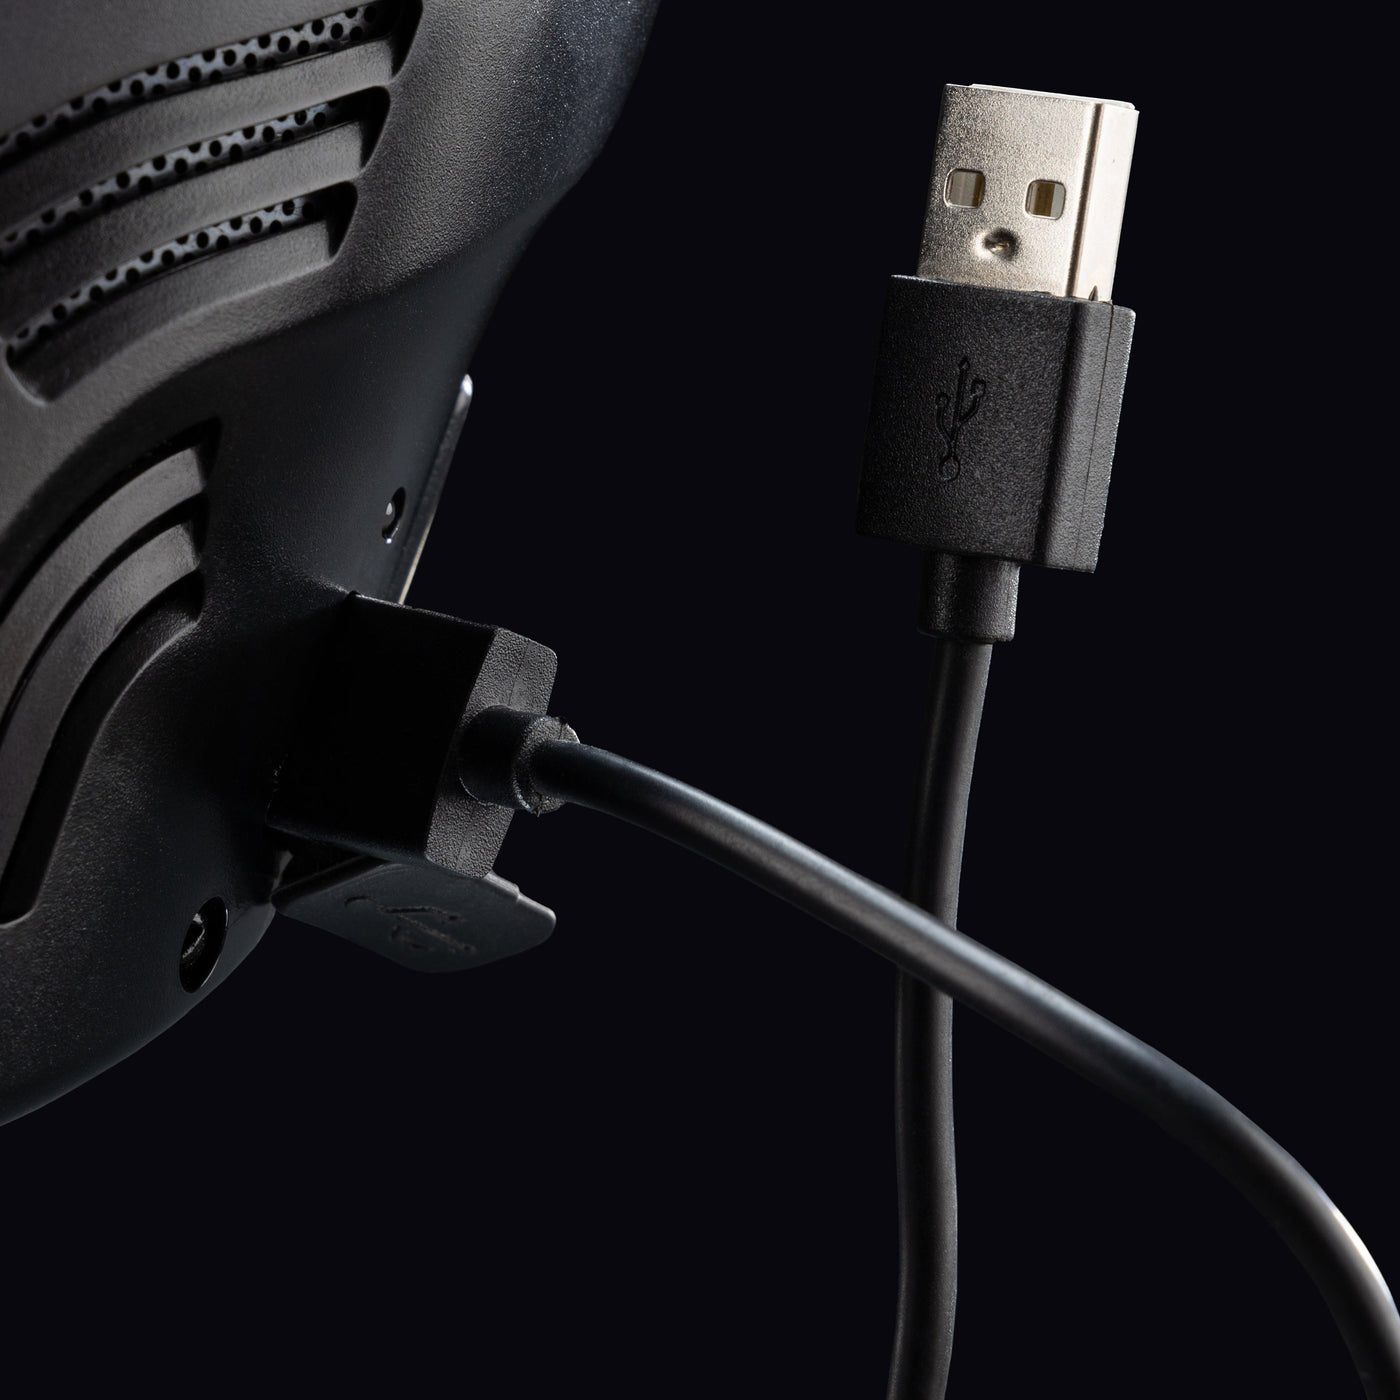 Picture of the Airlighter 520 charging cable plugged into the product.